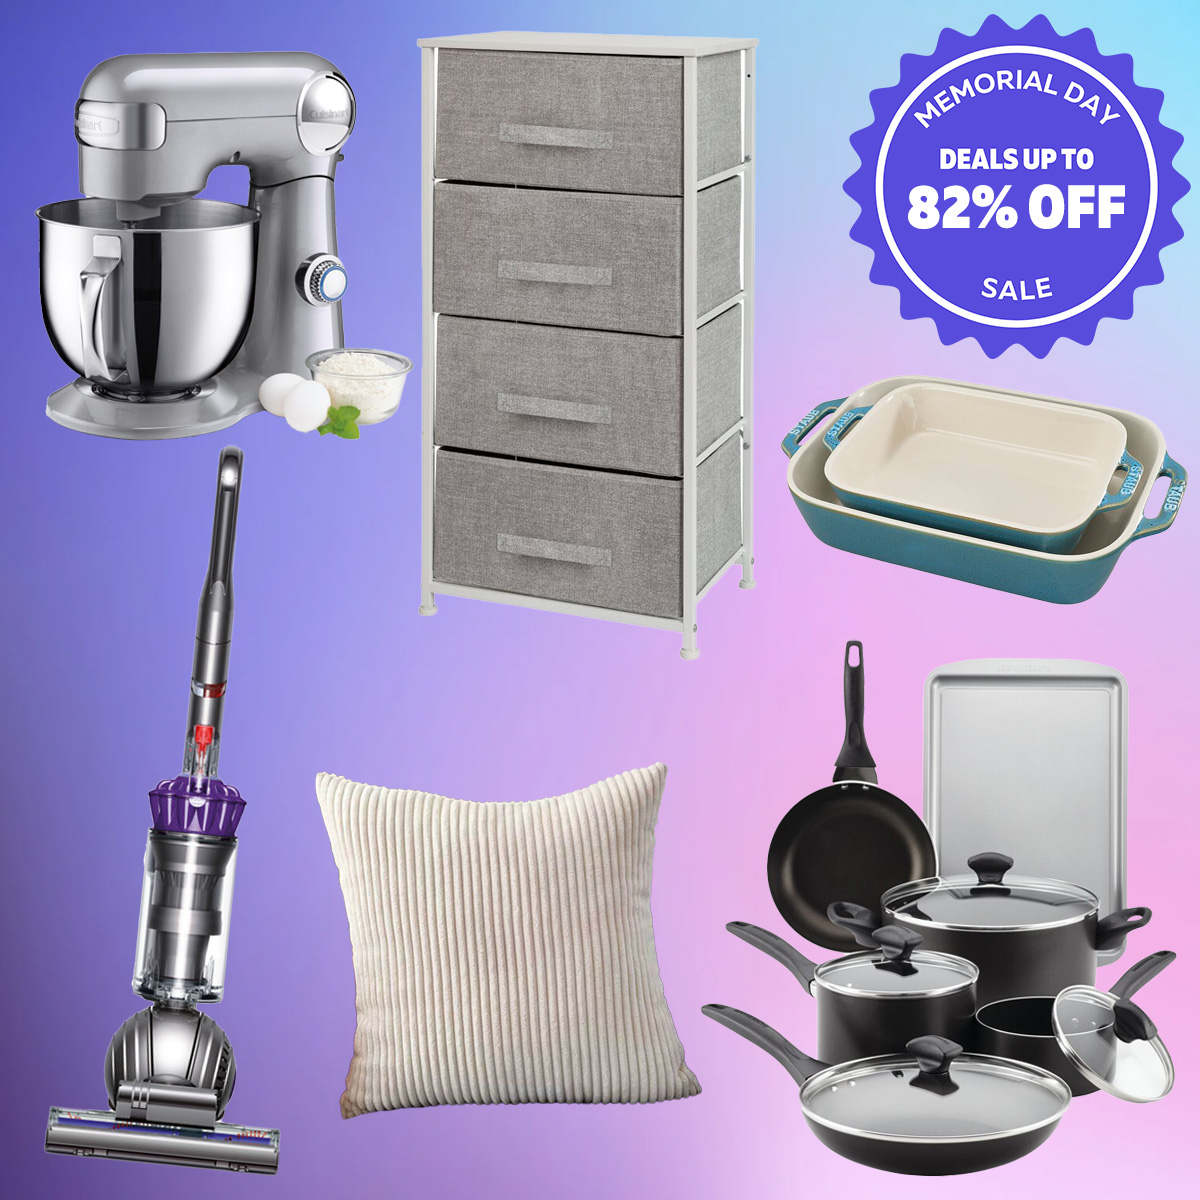 Spice up your kitchen with Wayfair's Clearance Sale - get deals on small  appliances, pots and pans 